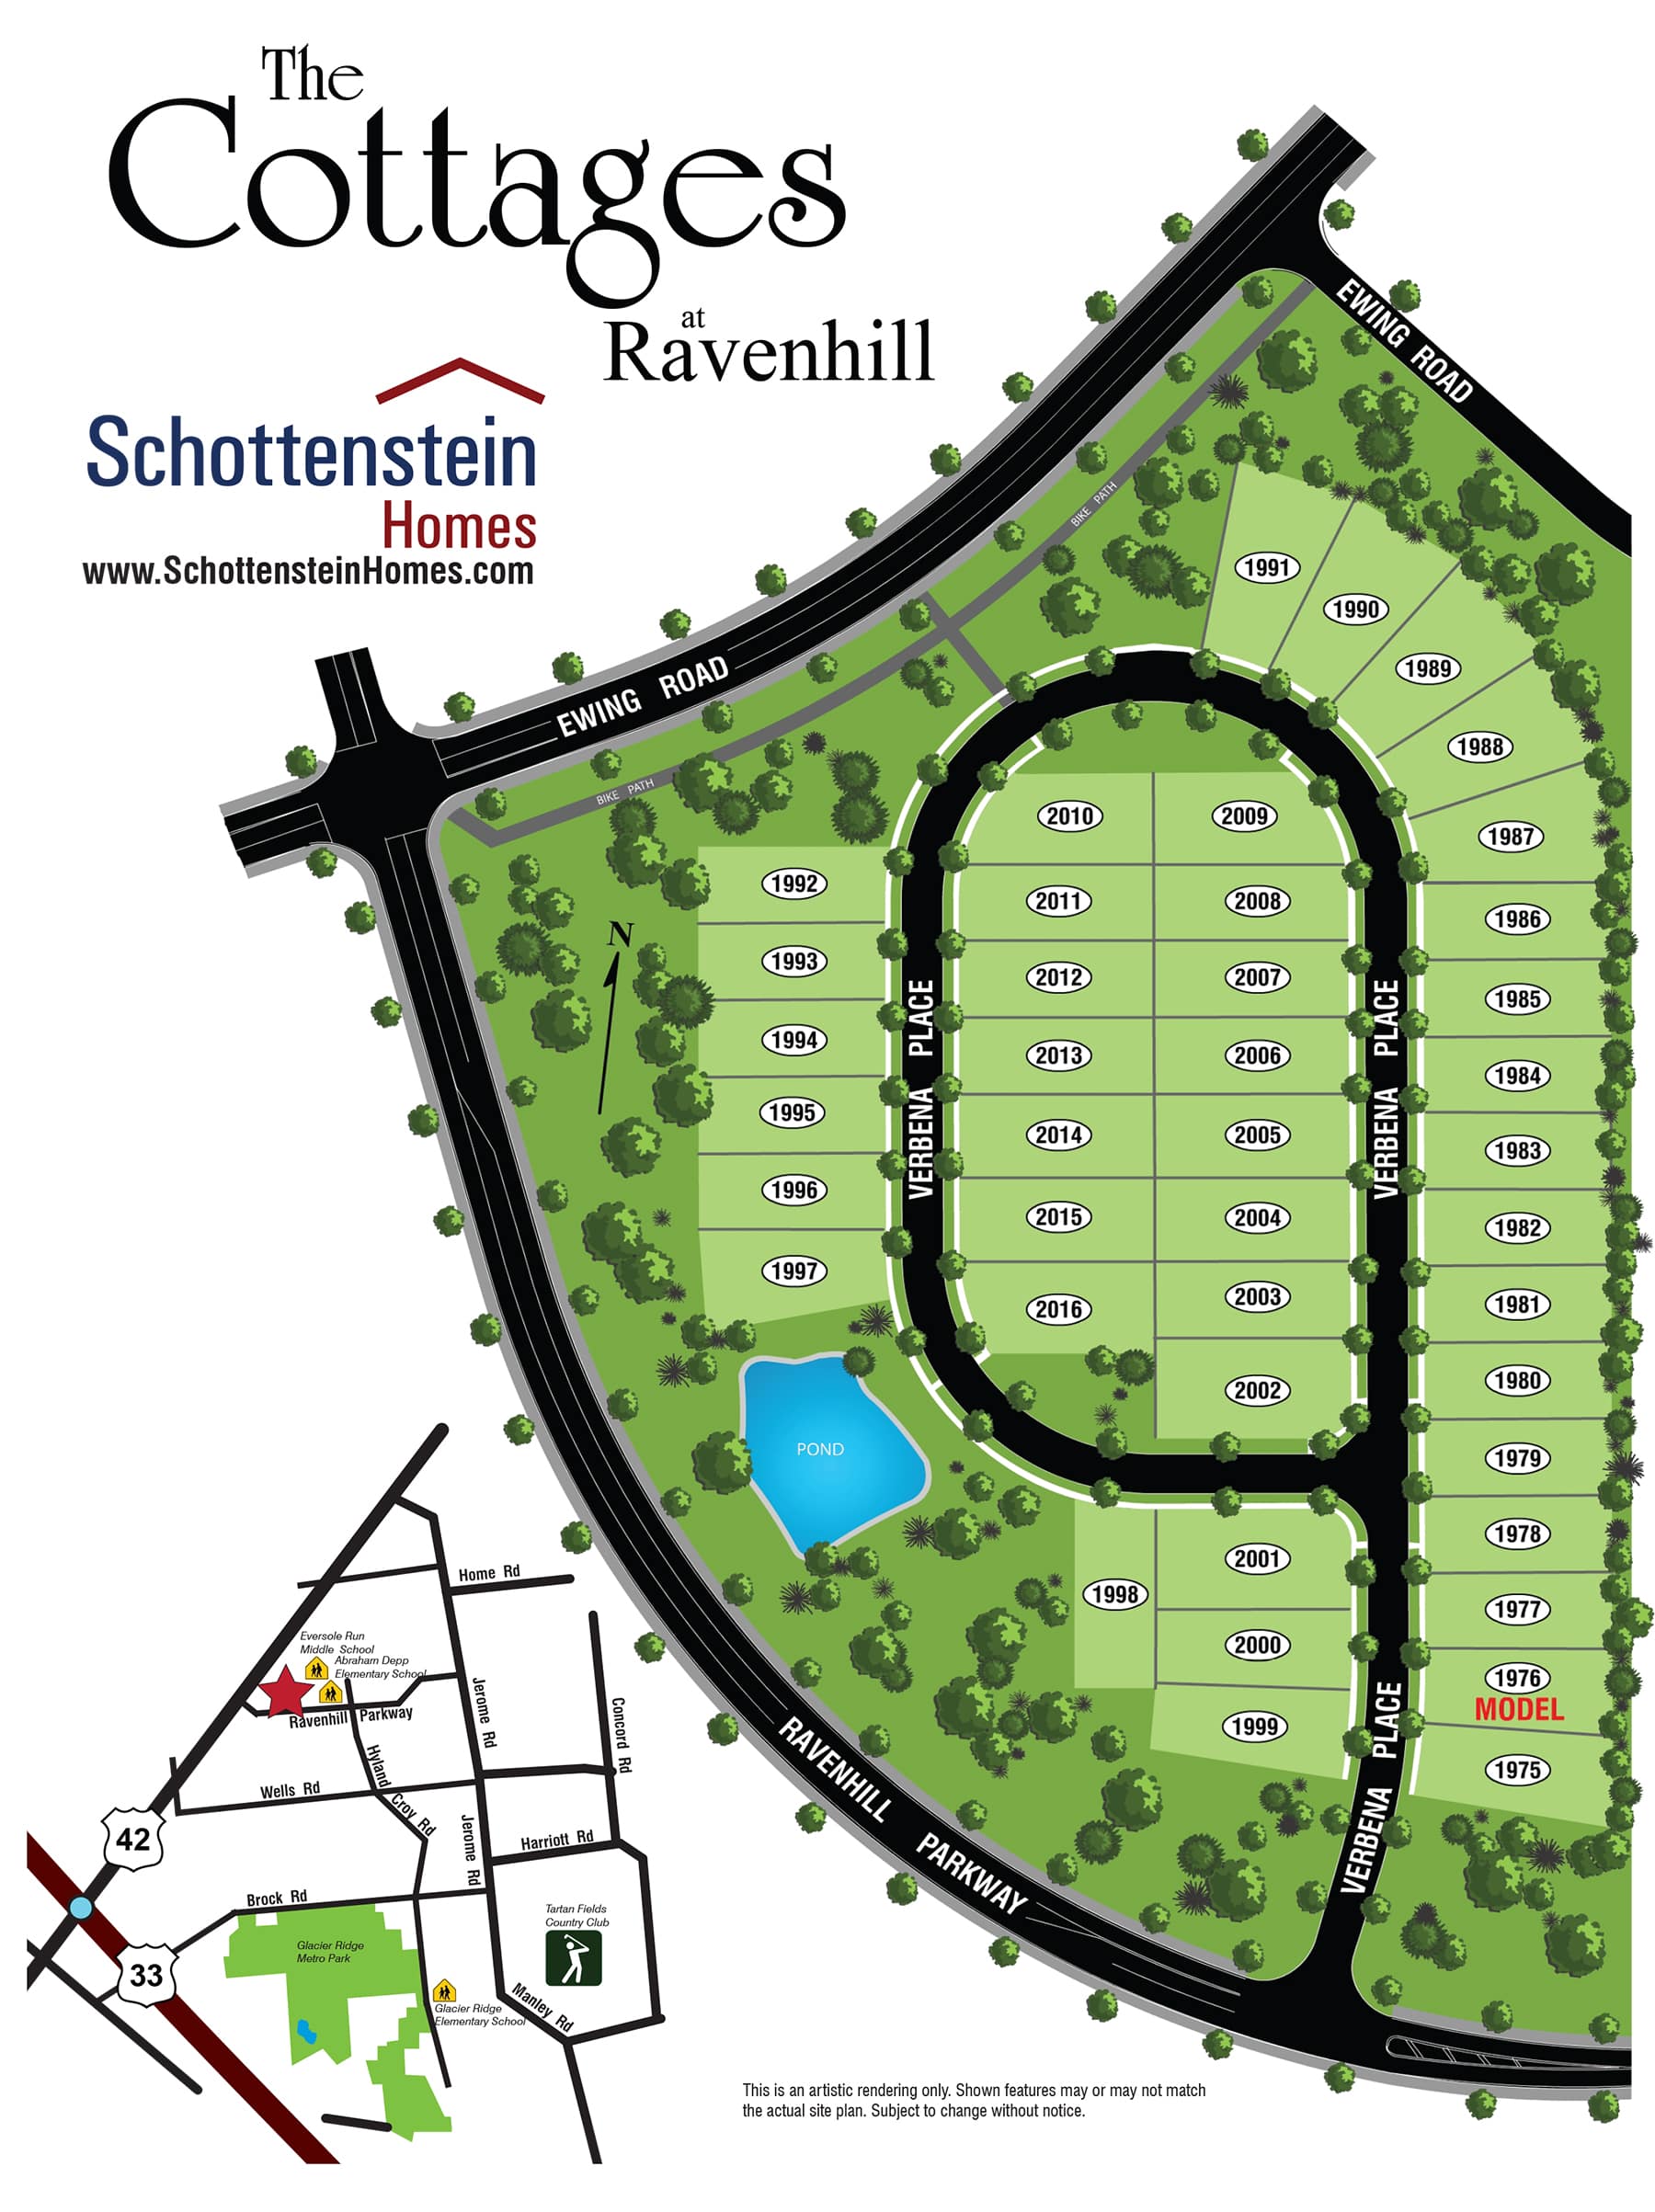 The Cottages at Ravenhill Site Plan